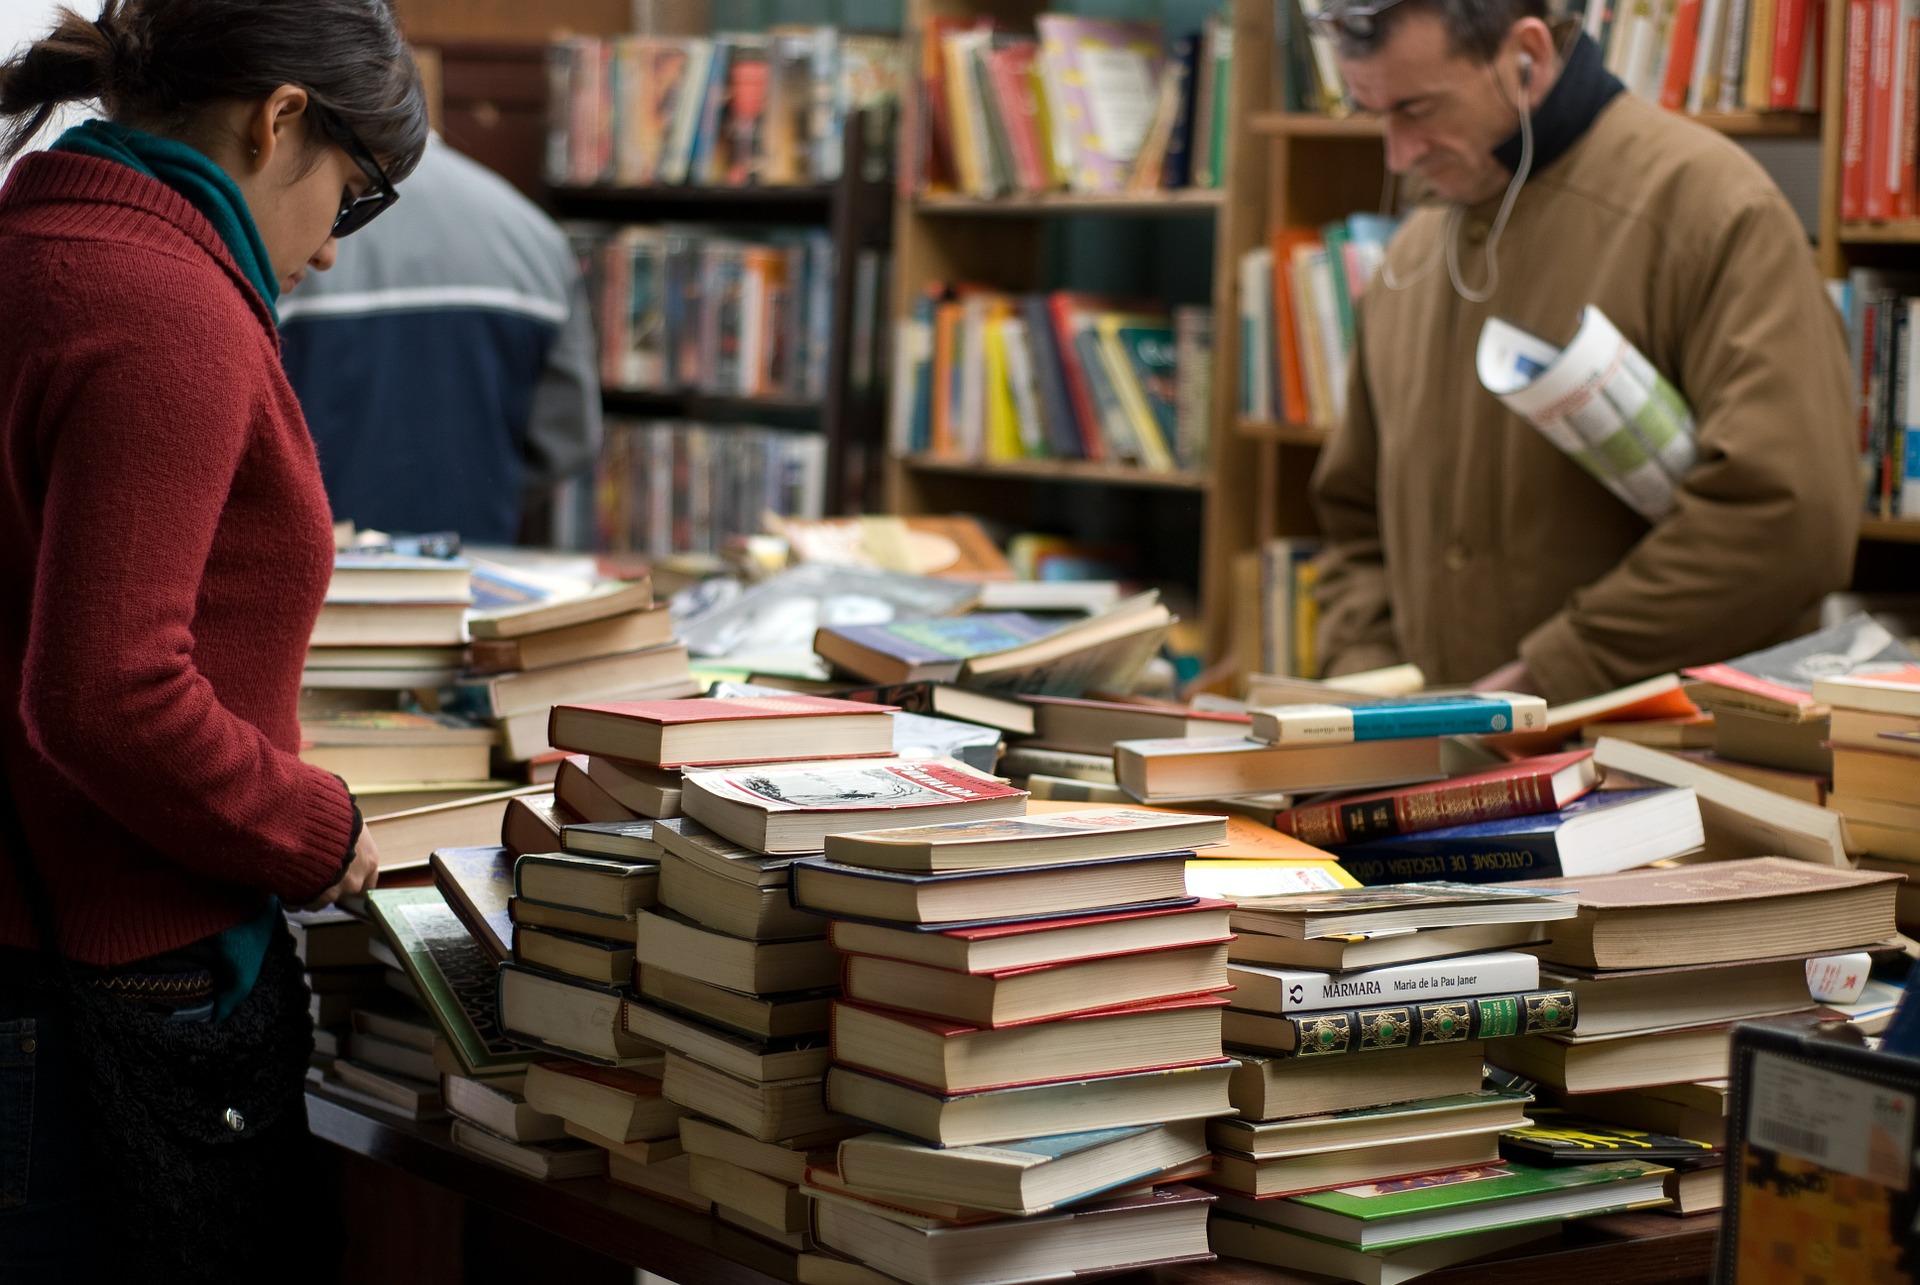 A man and woman browsing the stacks of books laid out on display at the book sale